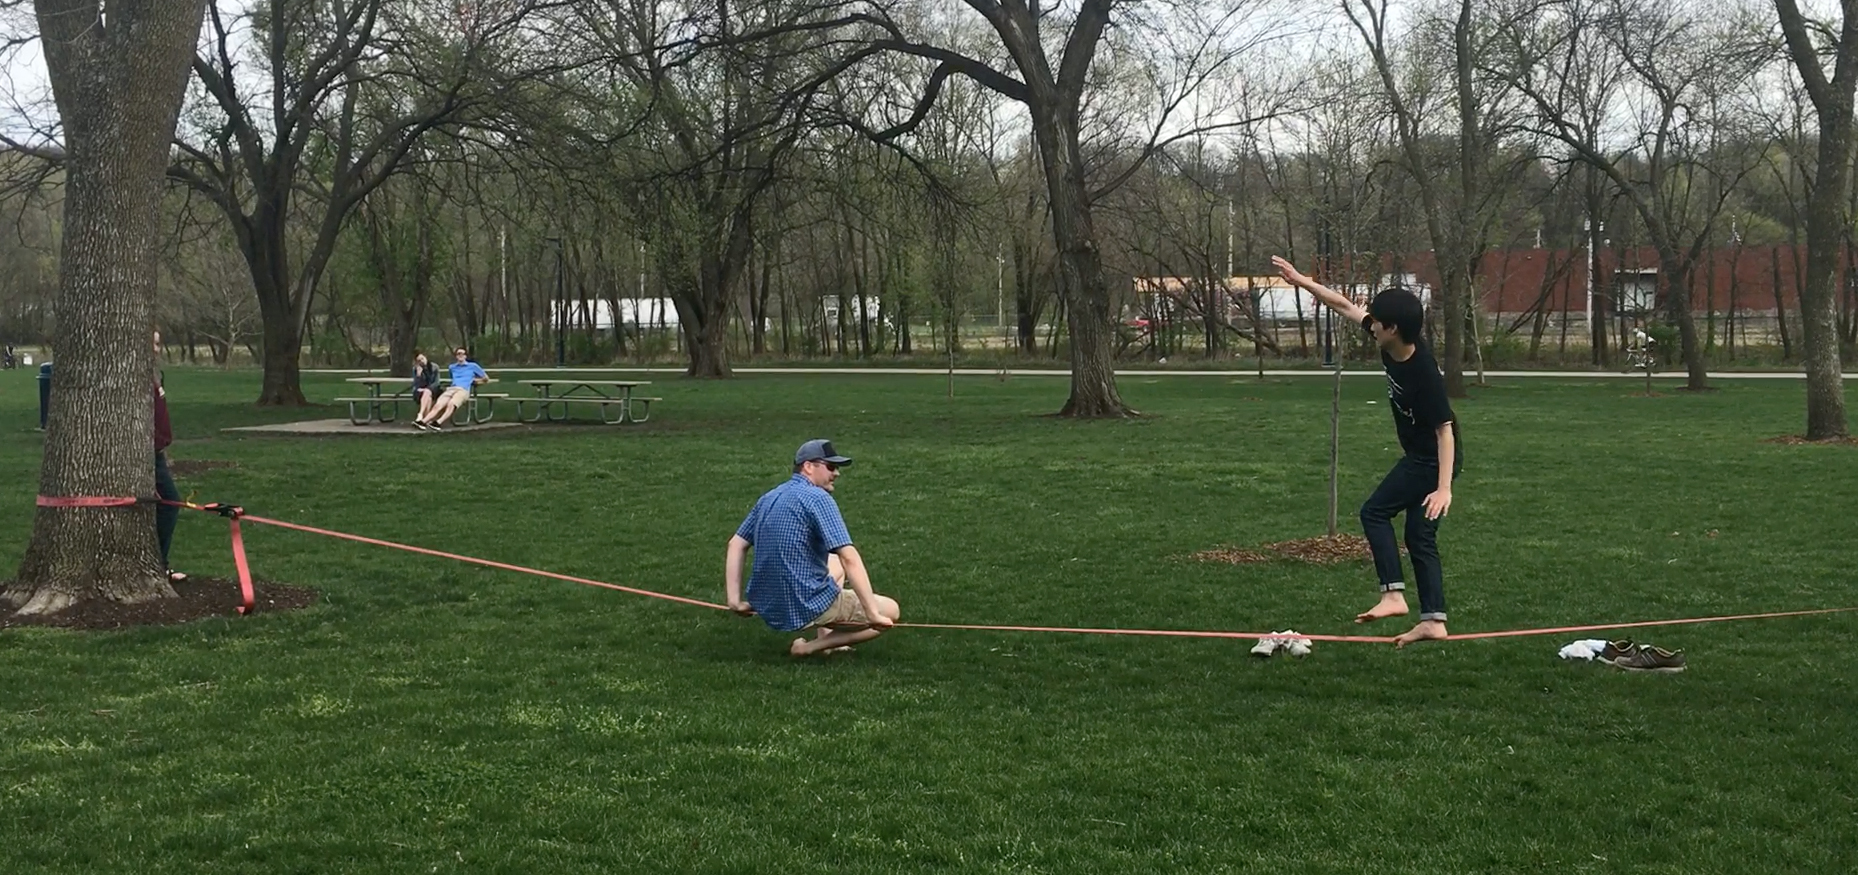 trying to do slack line but I've already 100% all districts, does